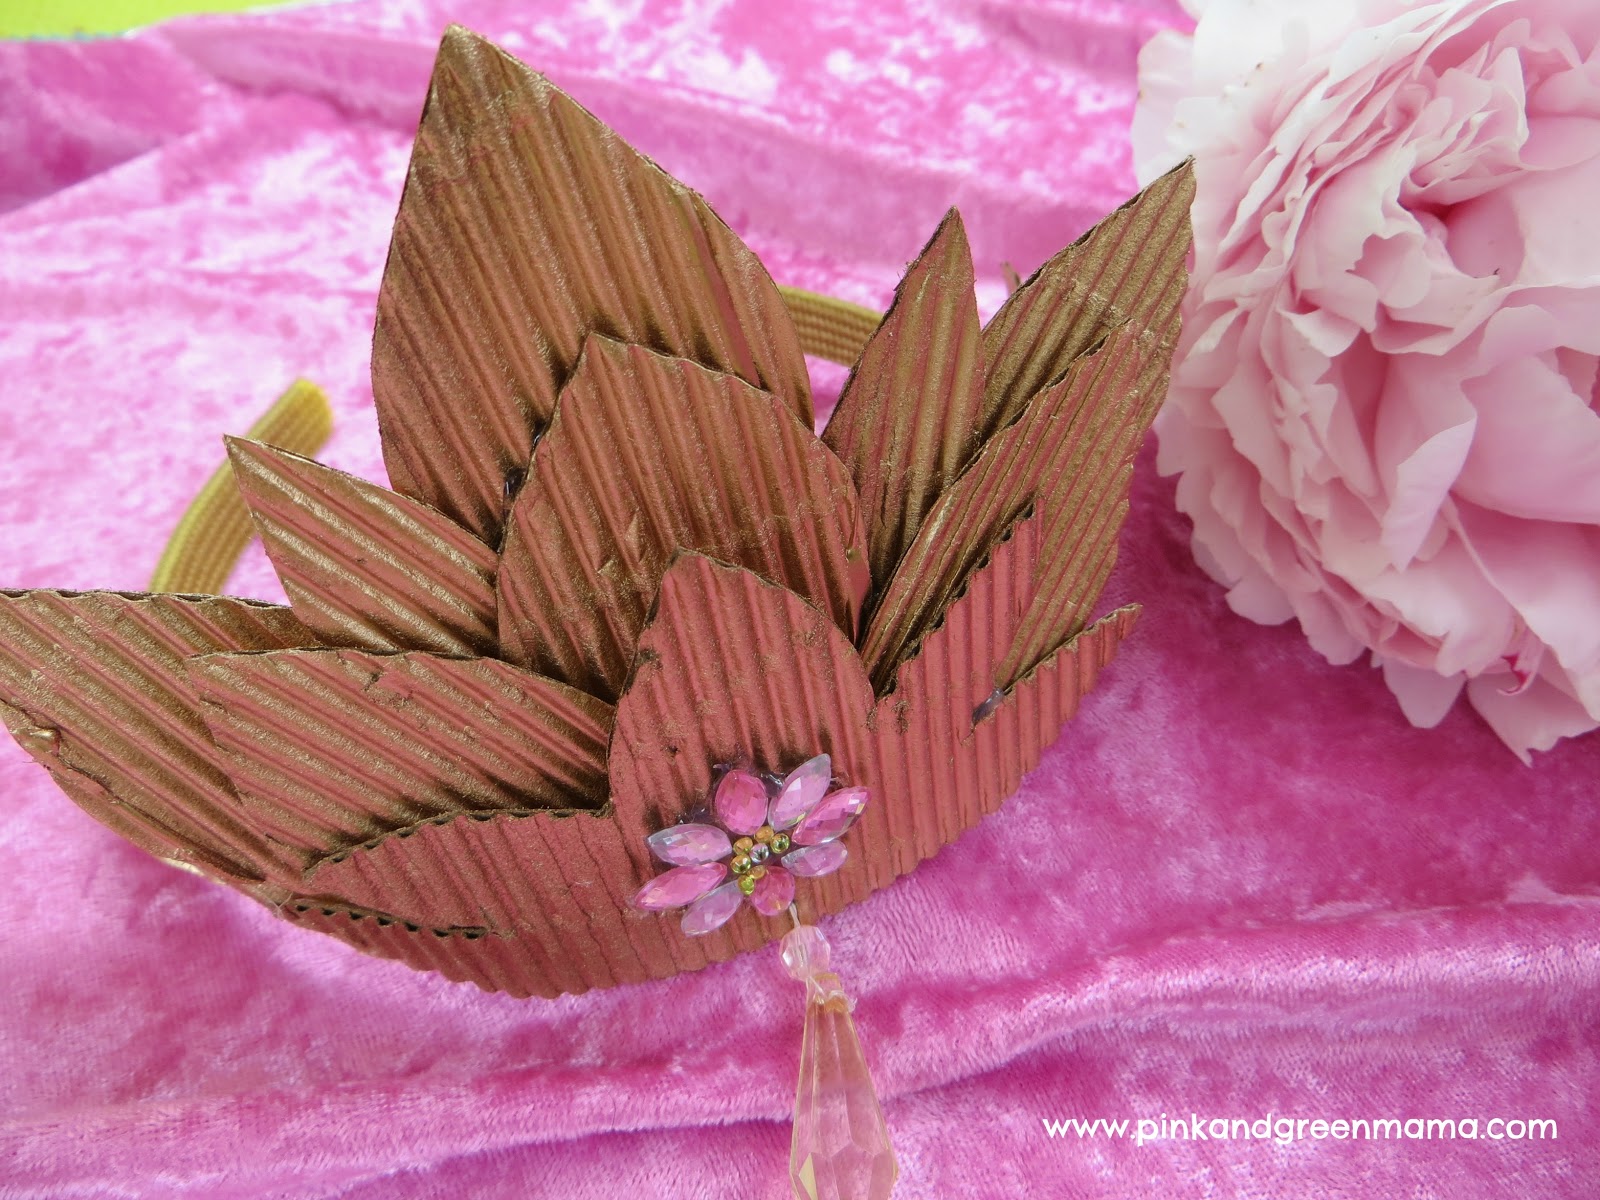 Pink and Green Mama: Recycled Crown Craft Inspired By Oz The Great And